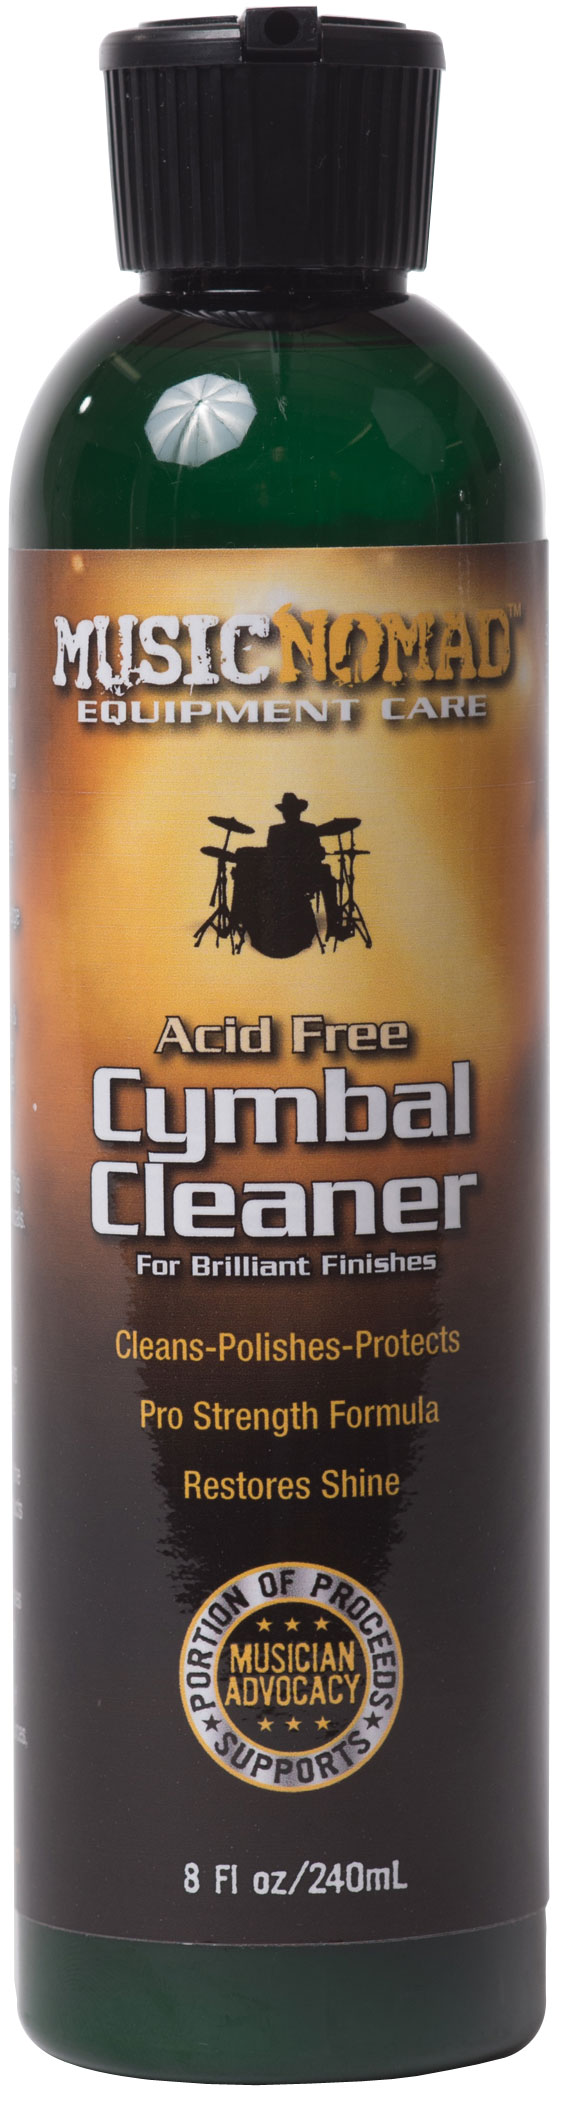 Music-Nomad Cymbal Cleaner - Cleans, Polishes & Protects